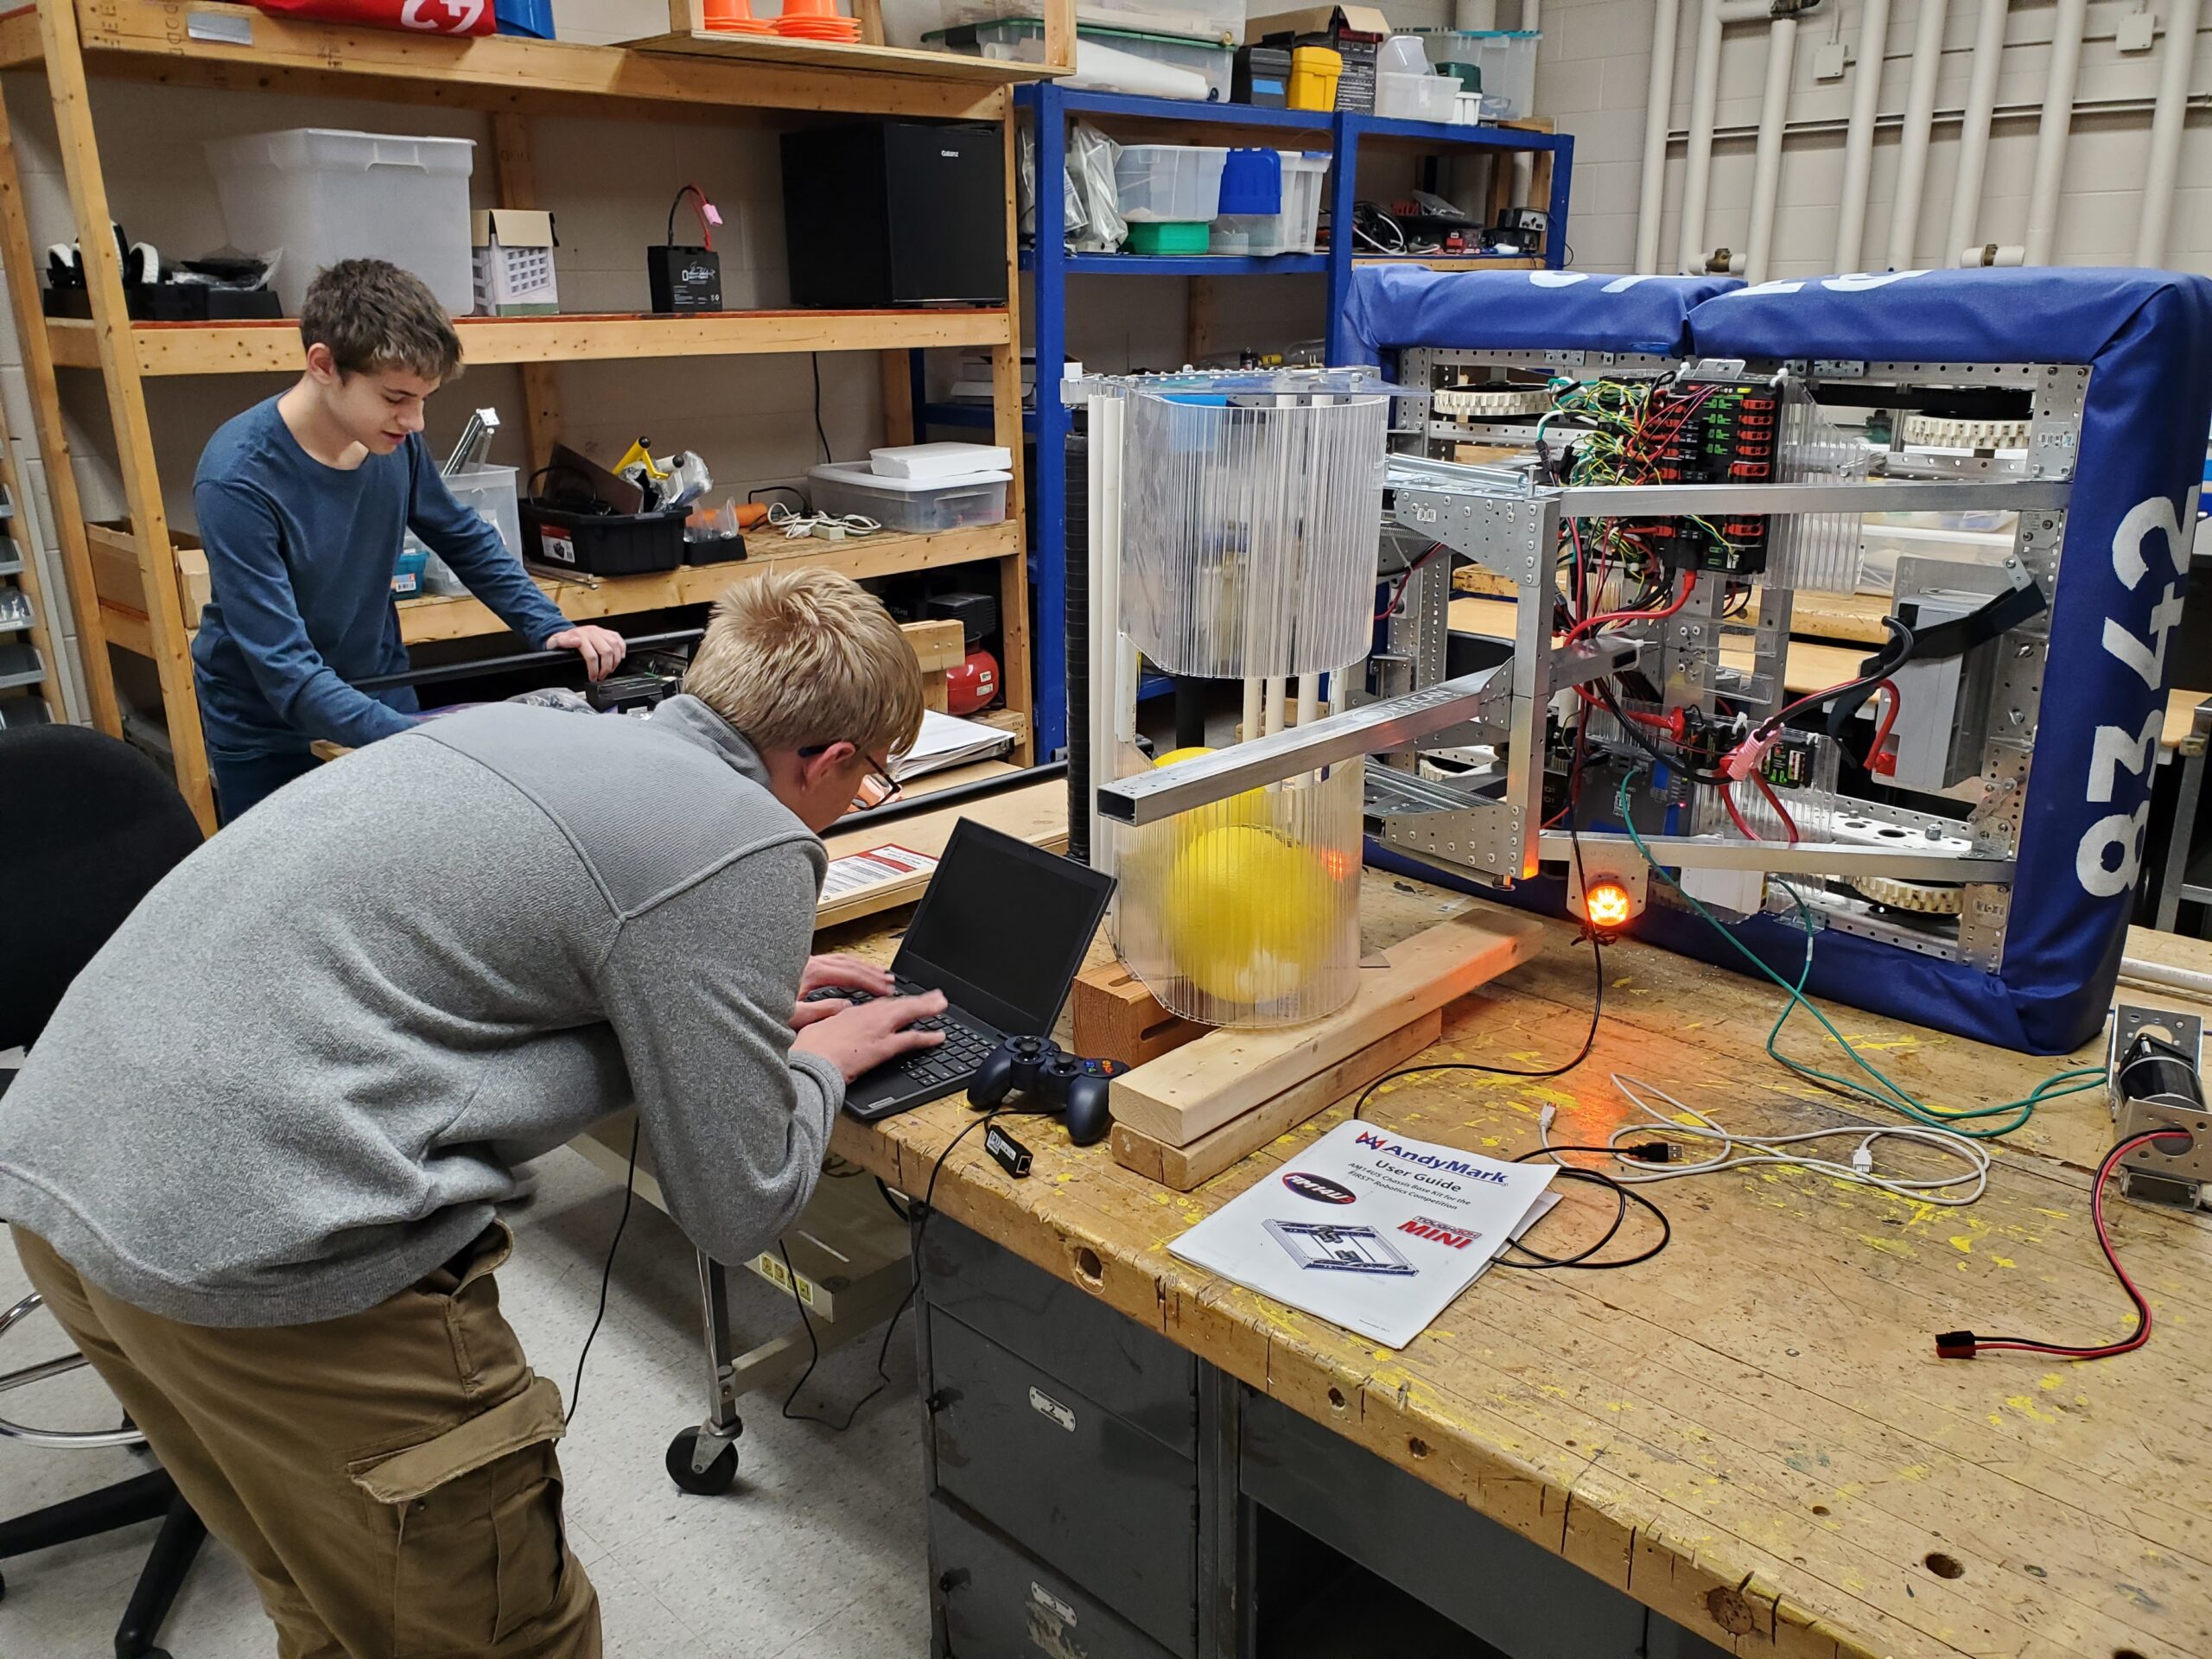 Students working on robotics project